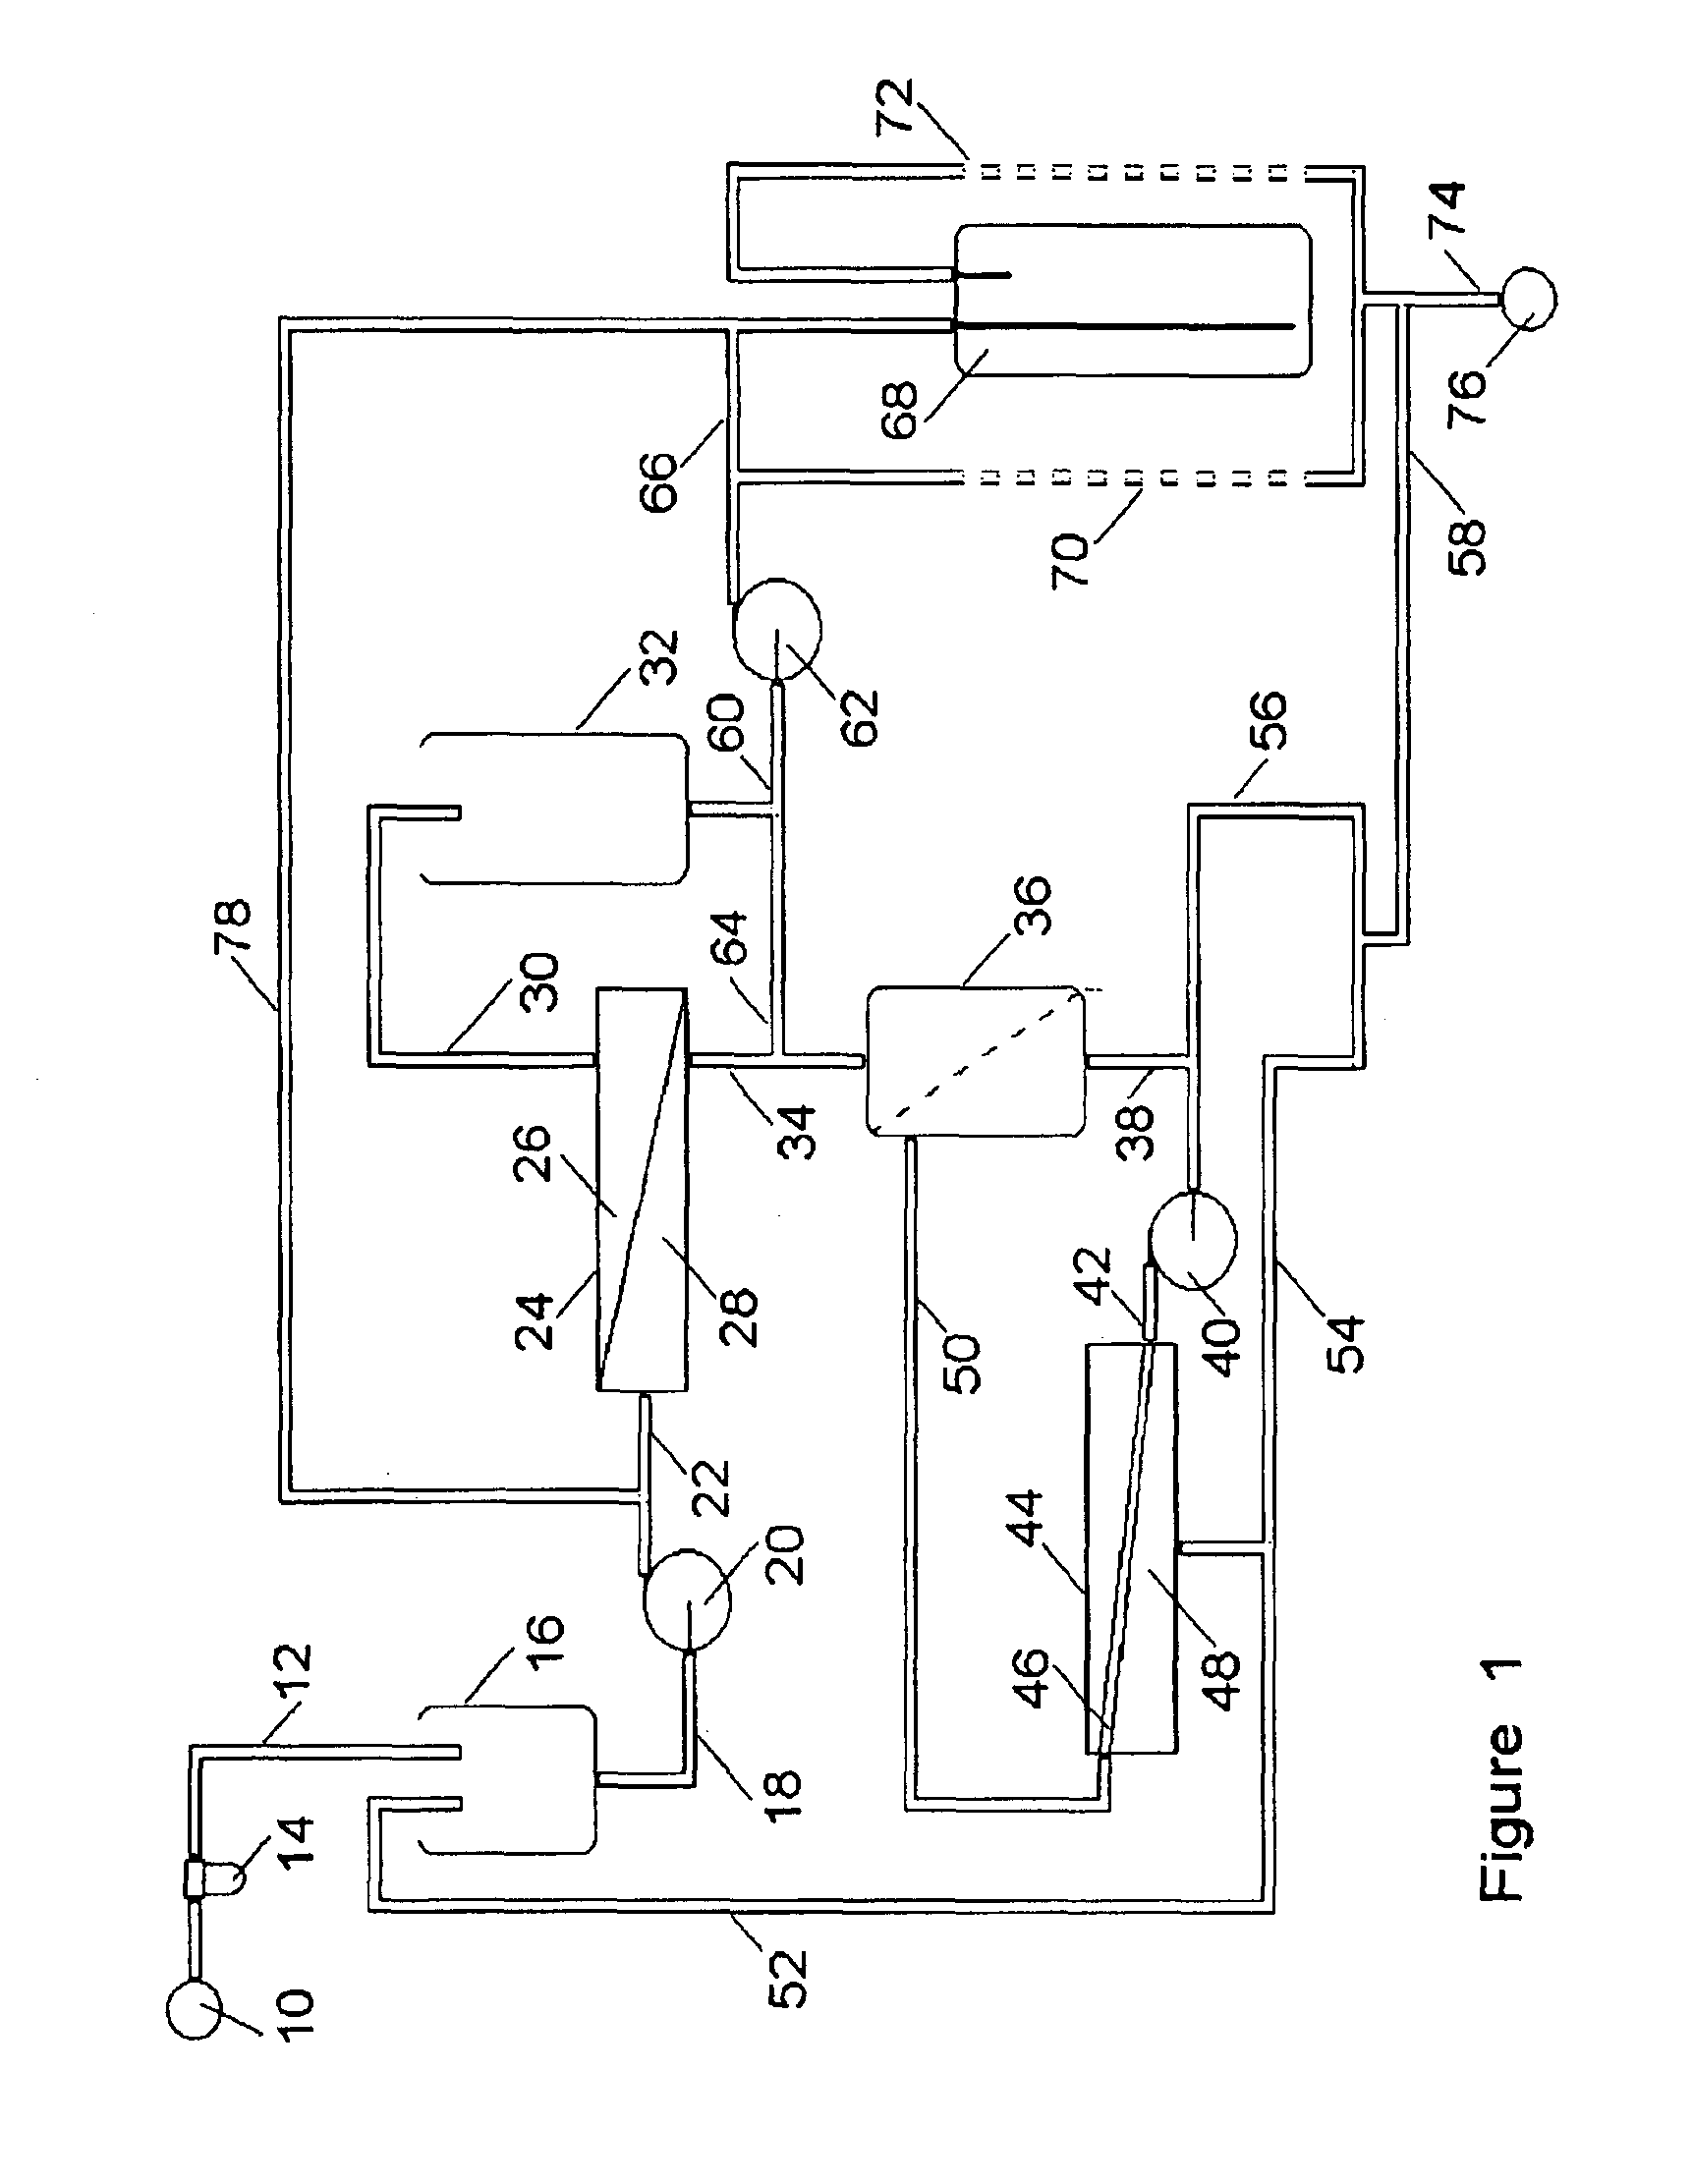 Method and apparatus for parallel desalting